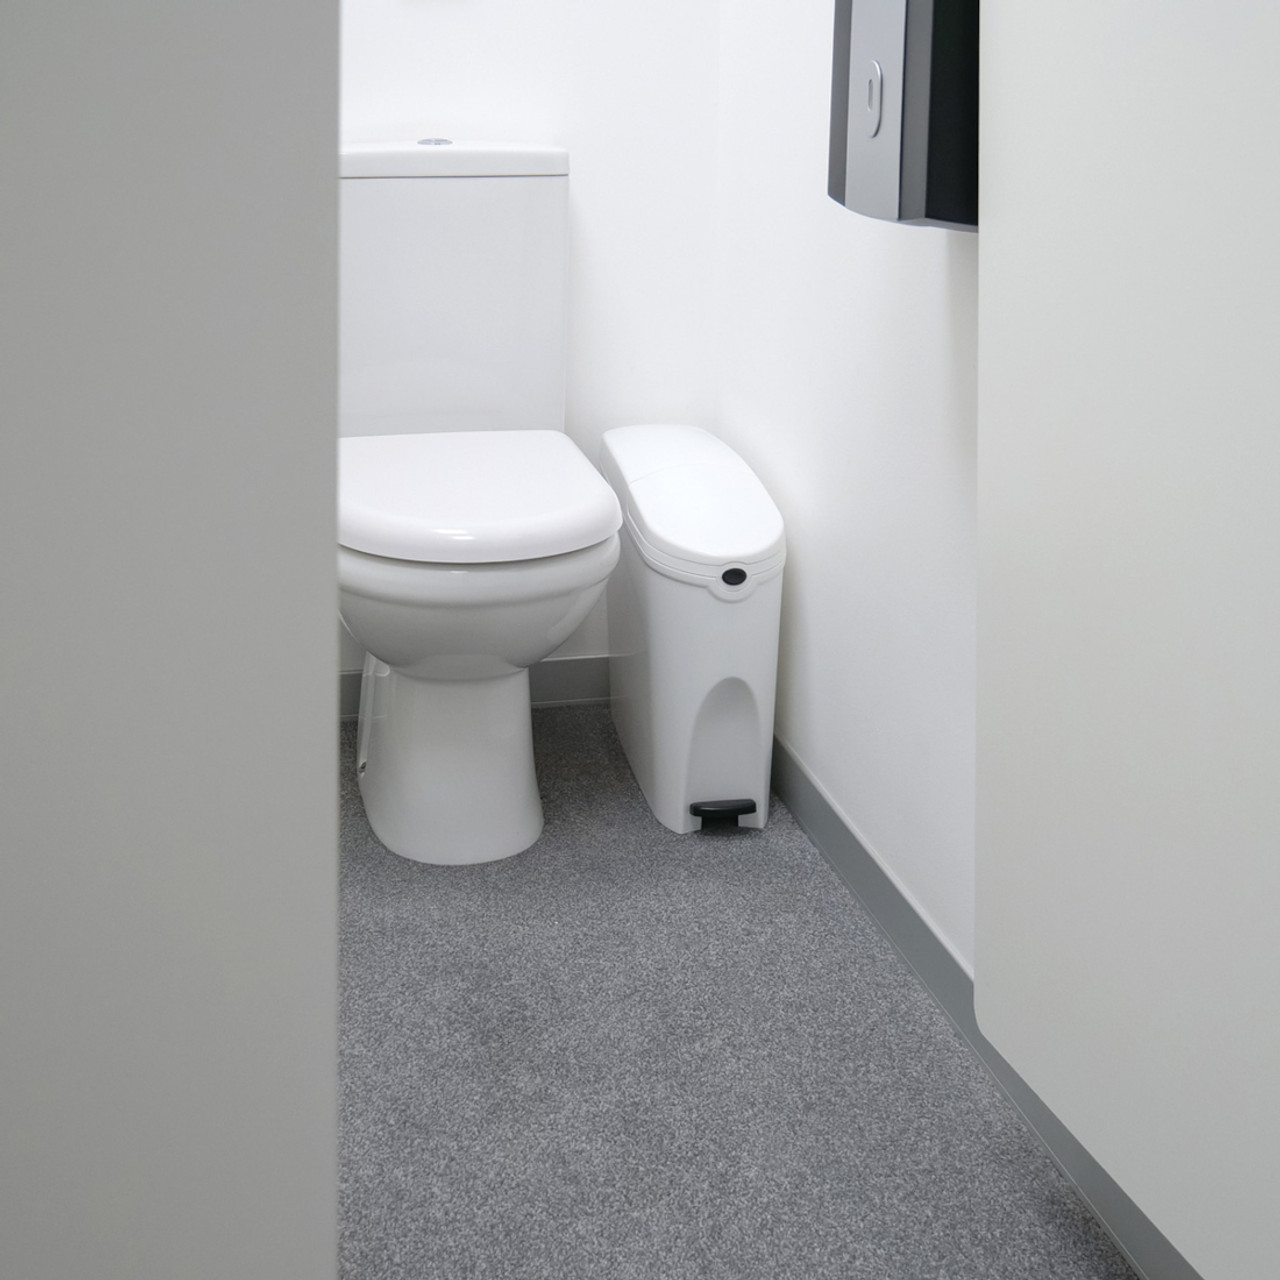 WR-ZYS-20LJ-WHITE - Pedal Operated Sanitary Bin - 20 Ltr - White - In Toilet Cubicle